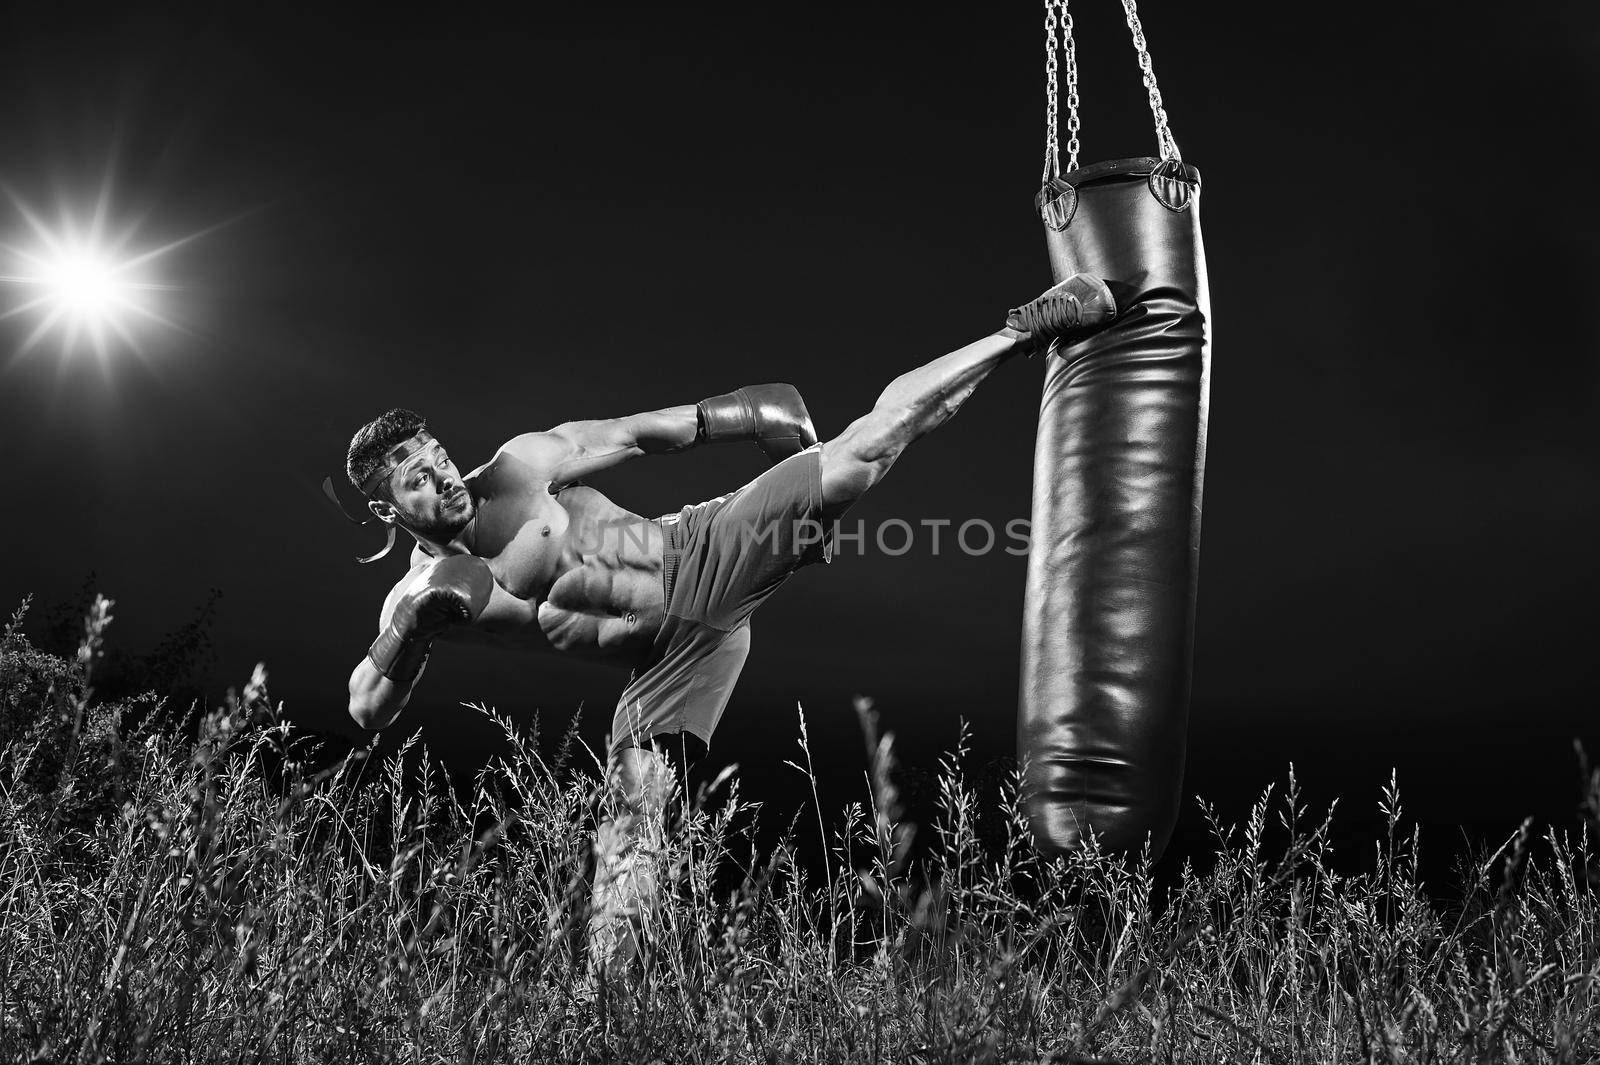 Black and white shot of a professional kick boxer practicing on a heavy punching bag outdoors at night copyspace motivation lifestyle workout muscles power strength masculinity martial sportsperson.